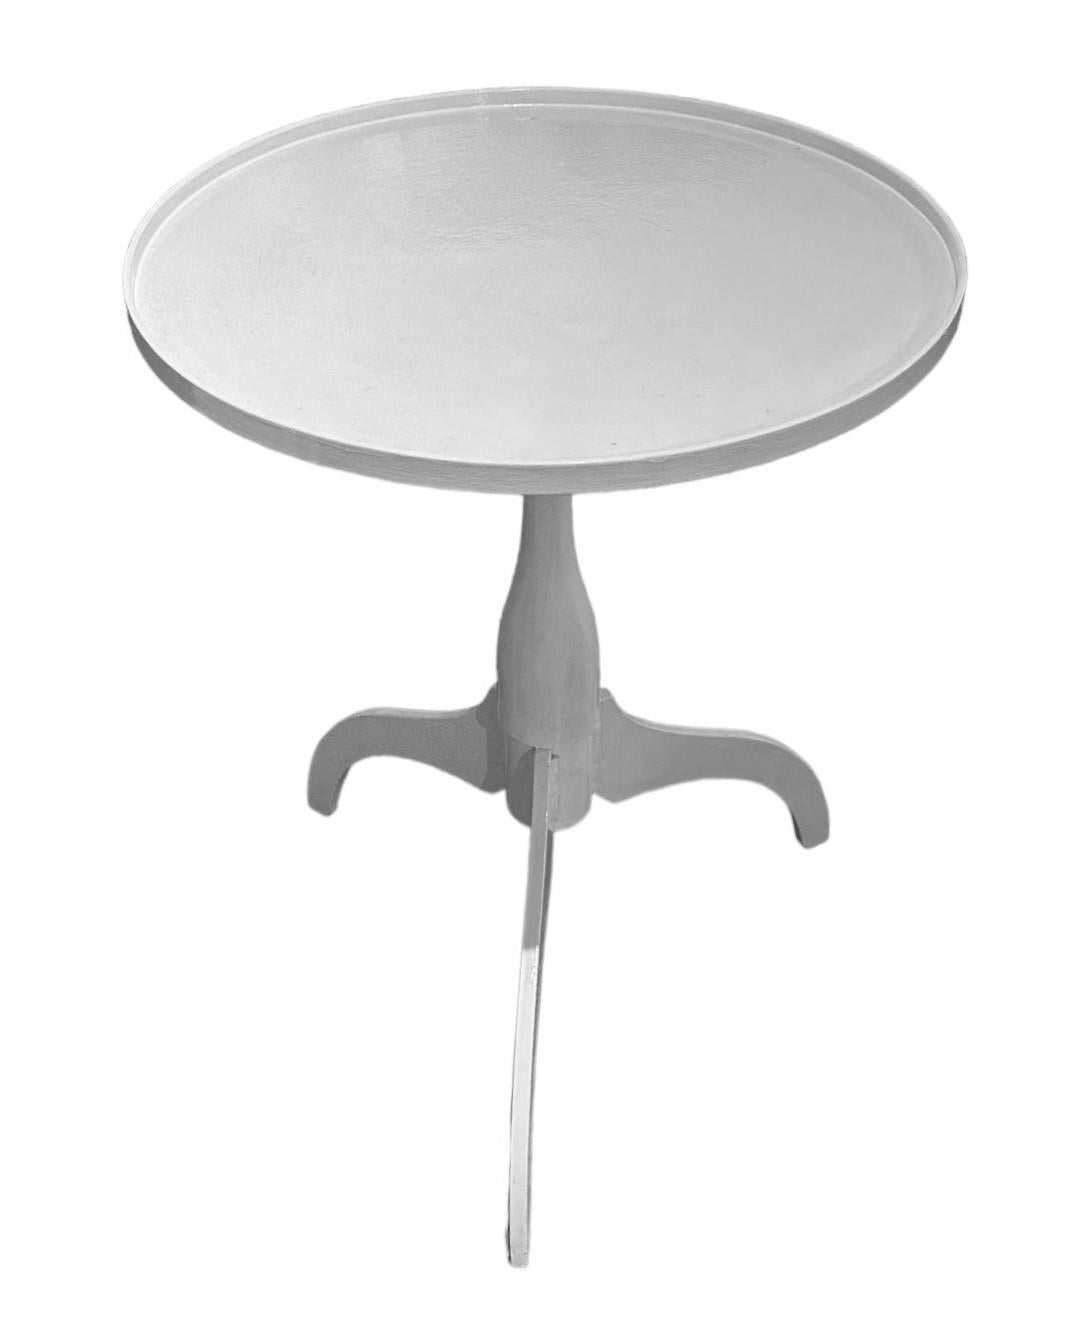 The Shaker inspired tripod stand is made of fully repurposed steel and then painted with a high gloss white paint.  Meticulously crafted, artist Jim Rose was a master welder as well as artistic creative master.  This stunningly simple yet highly